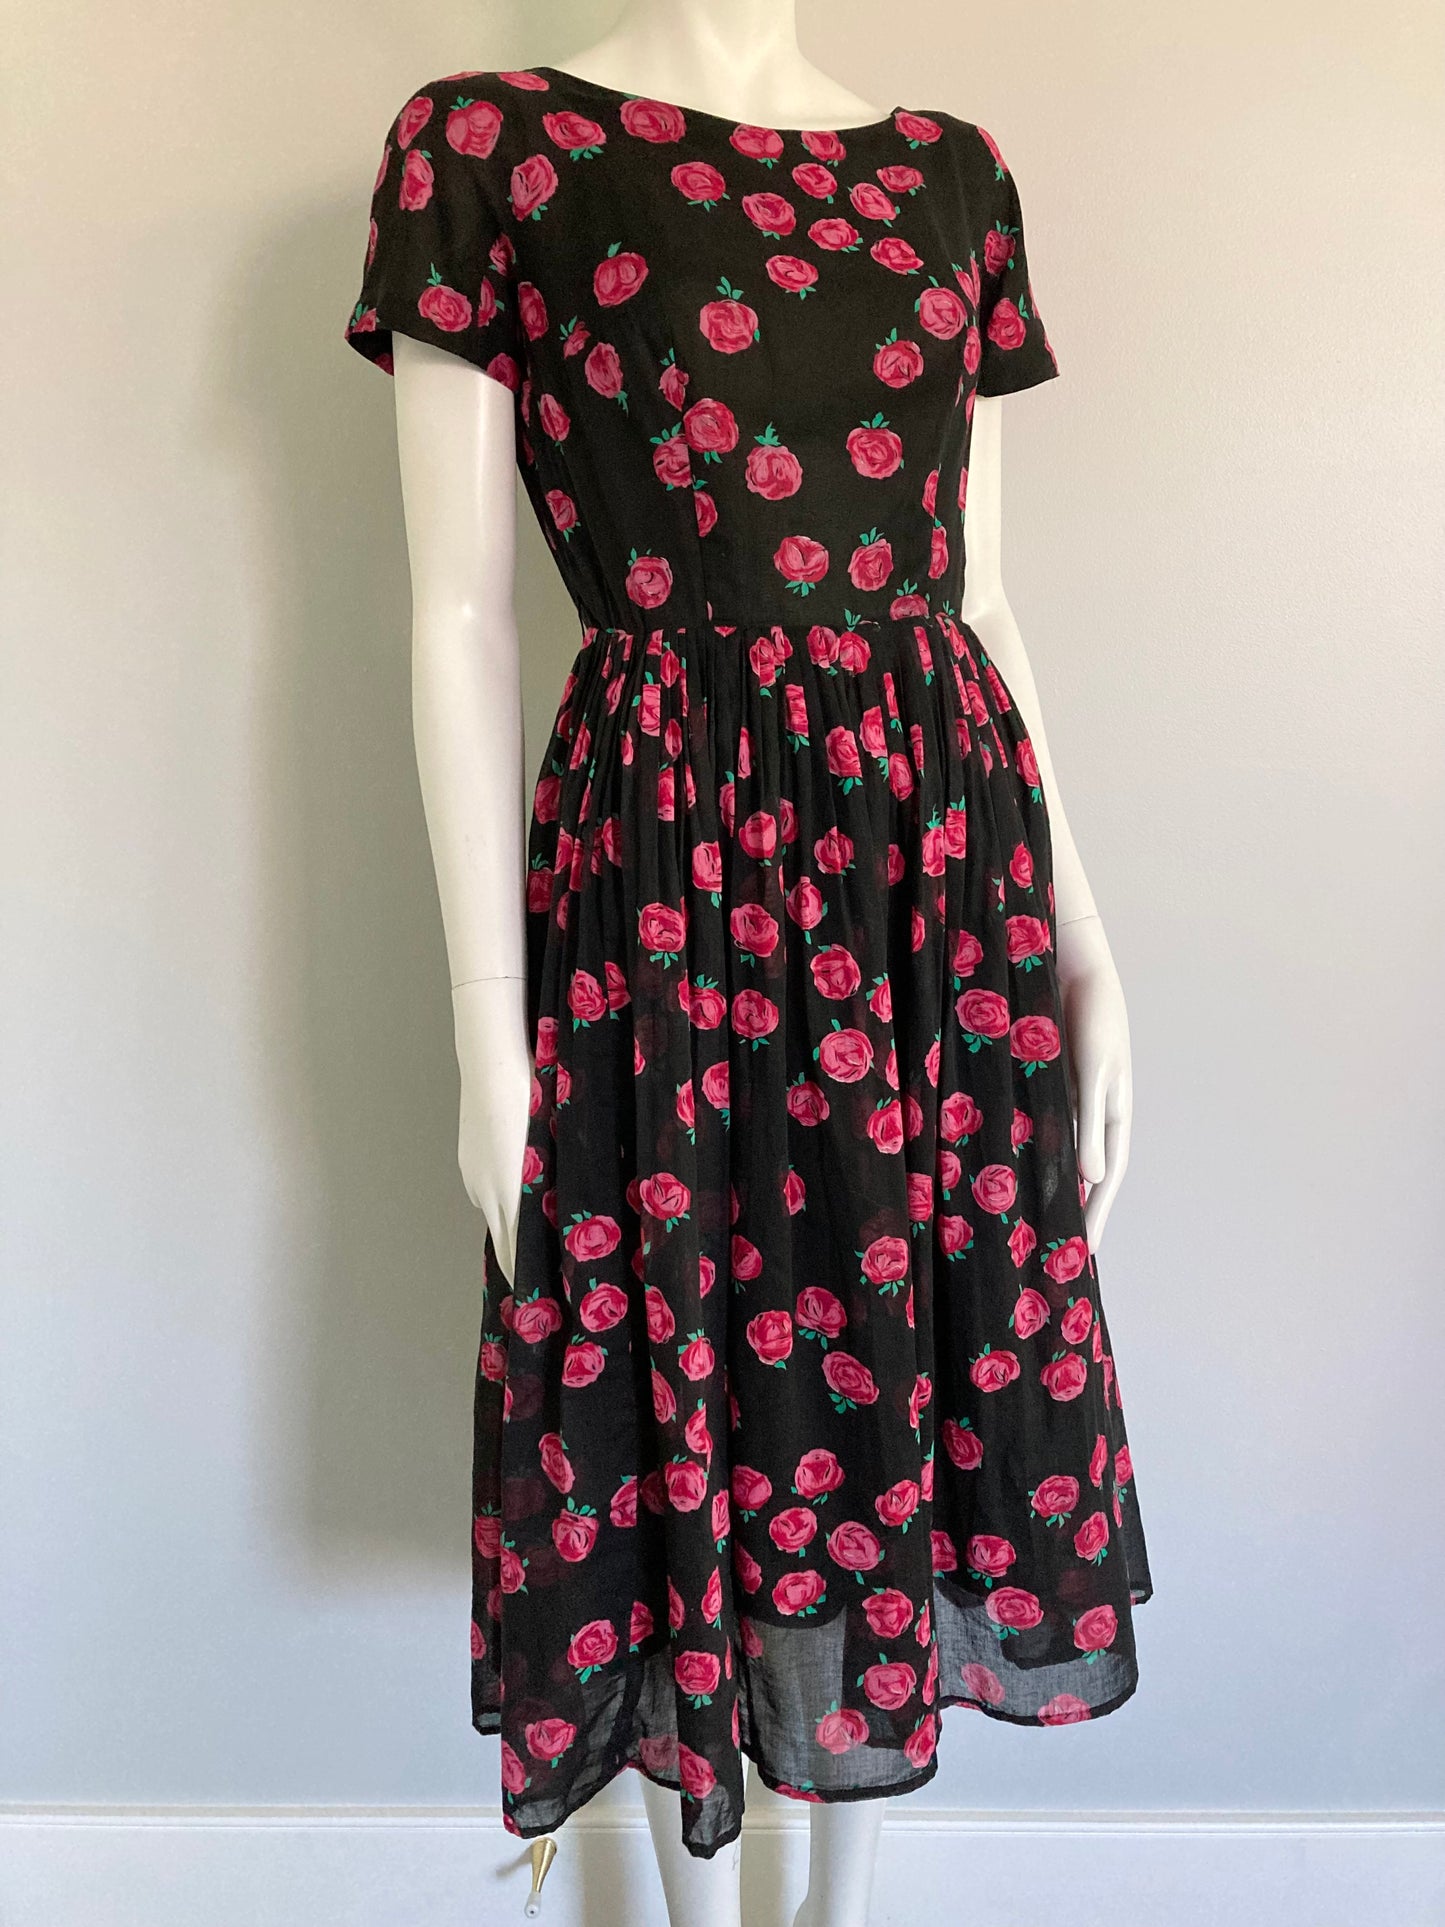 1950s Cotton Fit and Flare Dress, Size M, Black with Roses